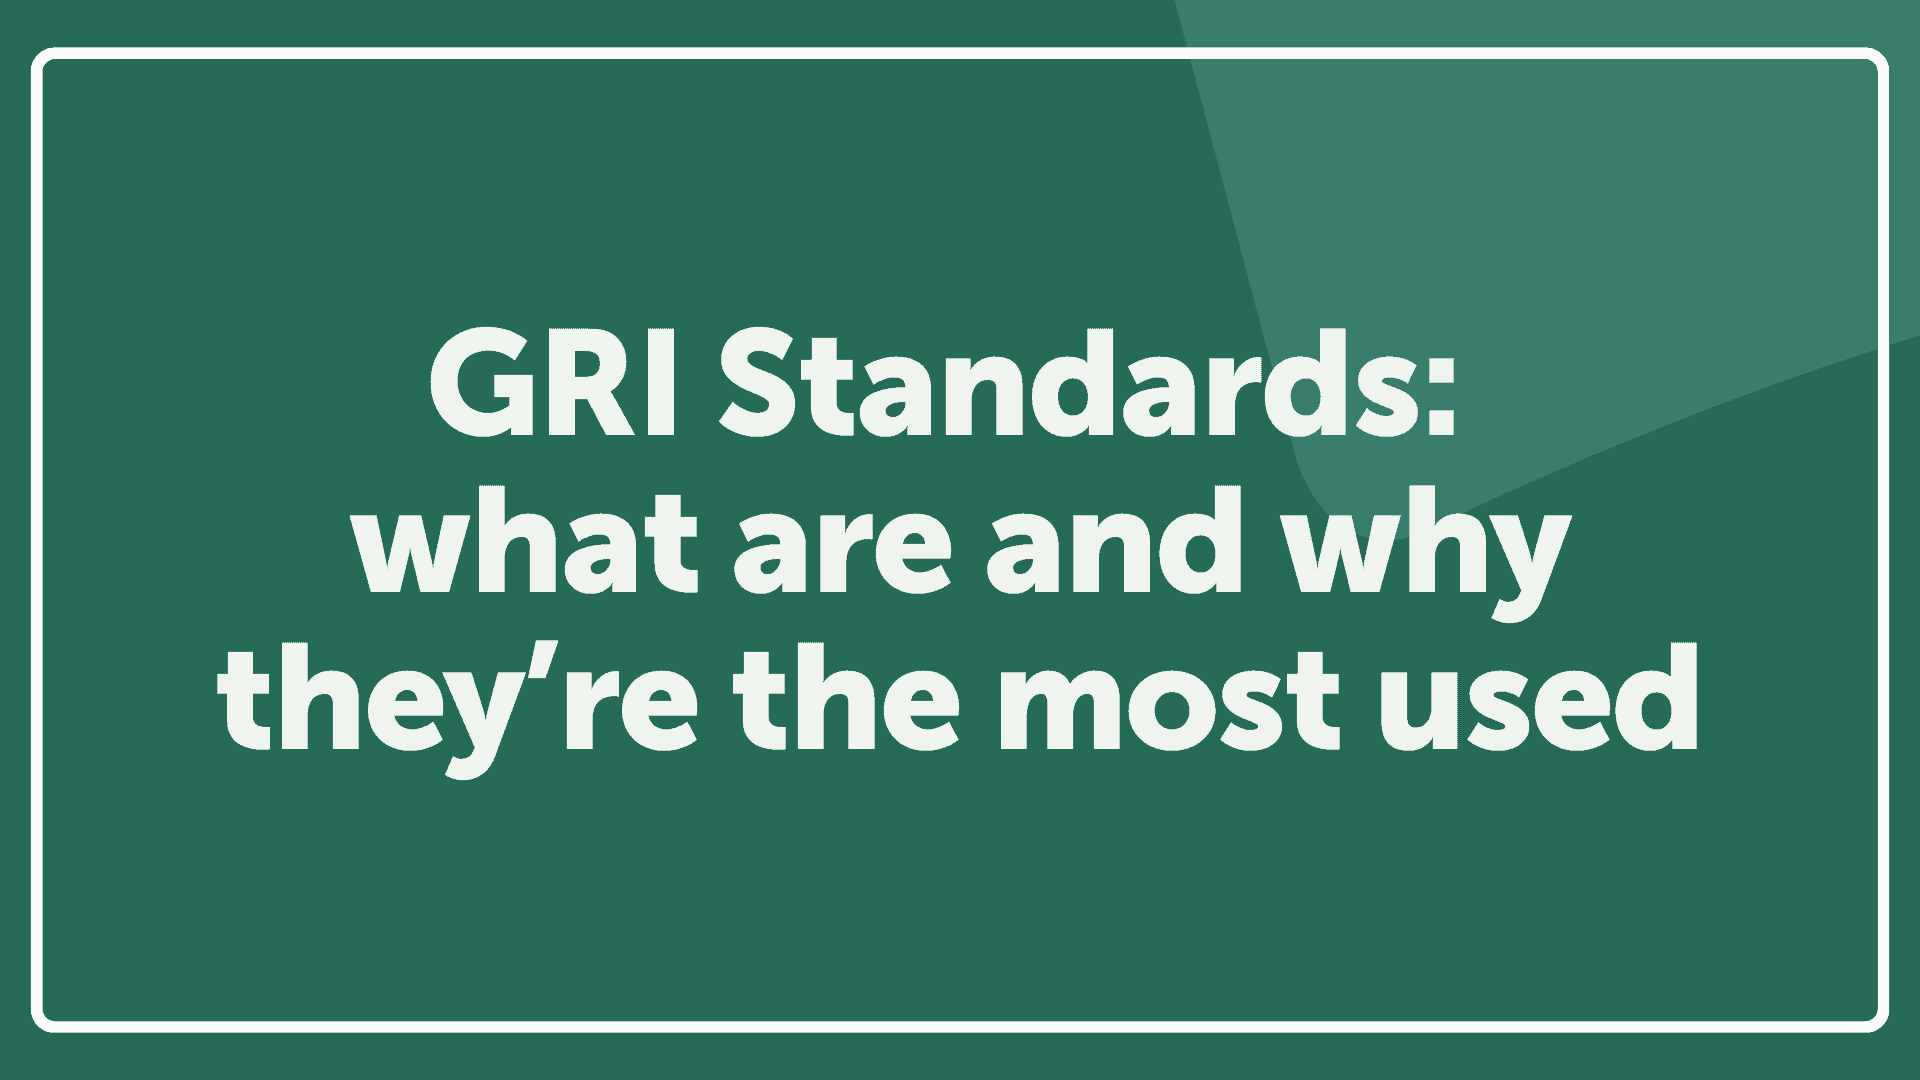 GRI Standards: what are and why they’re the most used